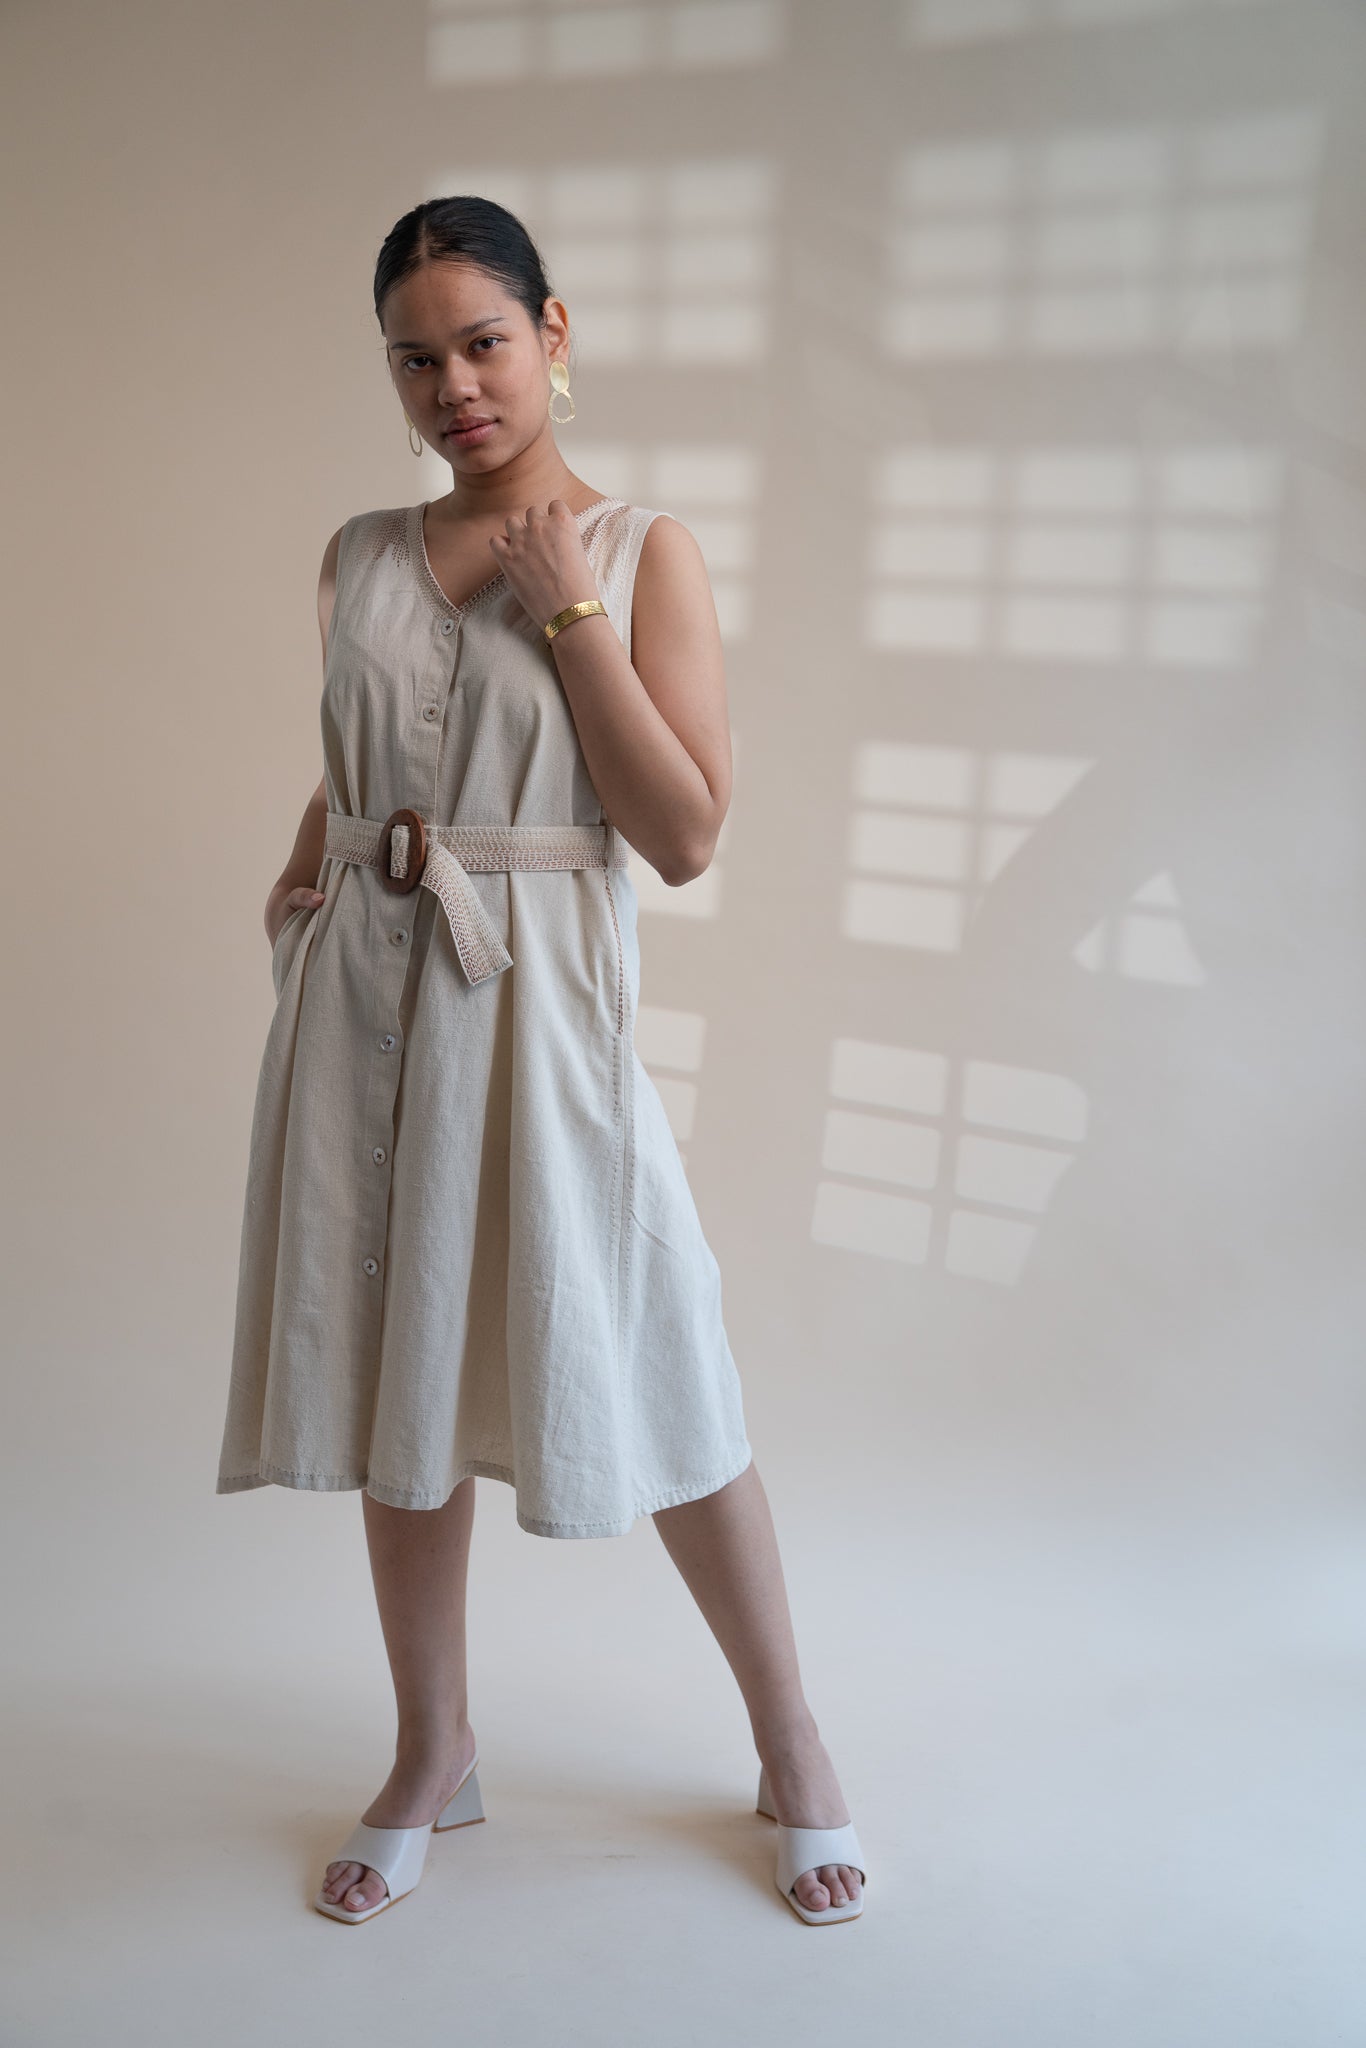 Dawning Trench Dress at Kamakhyaa by Lafaani. This item is Beige, Casual Wear, Denim, Embroidered, Hand Woven Cotton, Kora, Midi Dresses, Natural, Regular Fit, Sleeveless Dresses, Womenswear